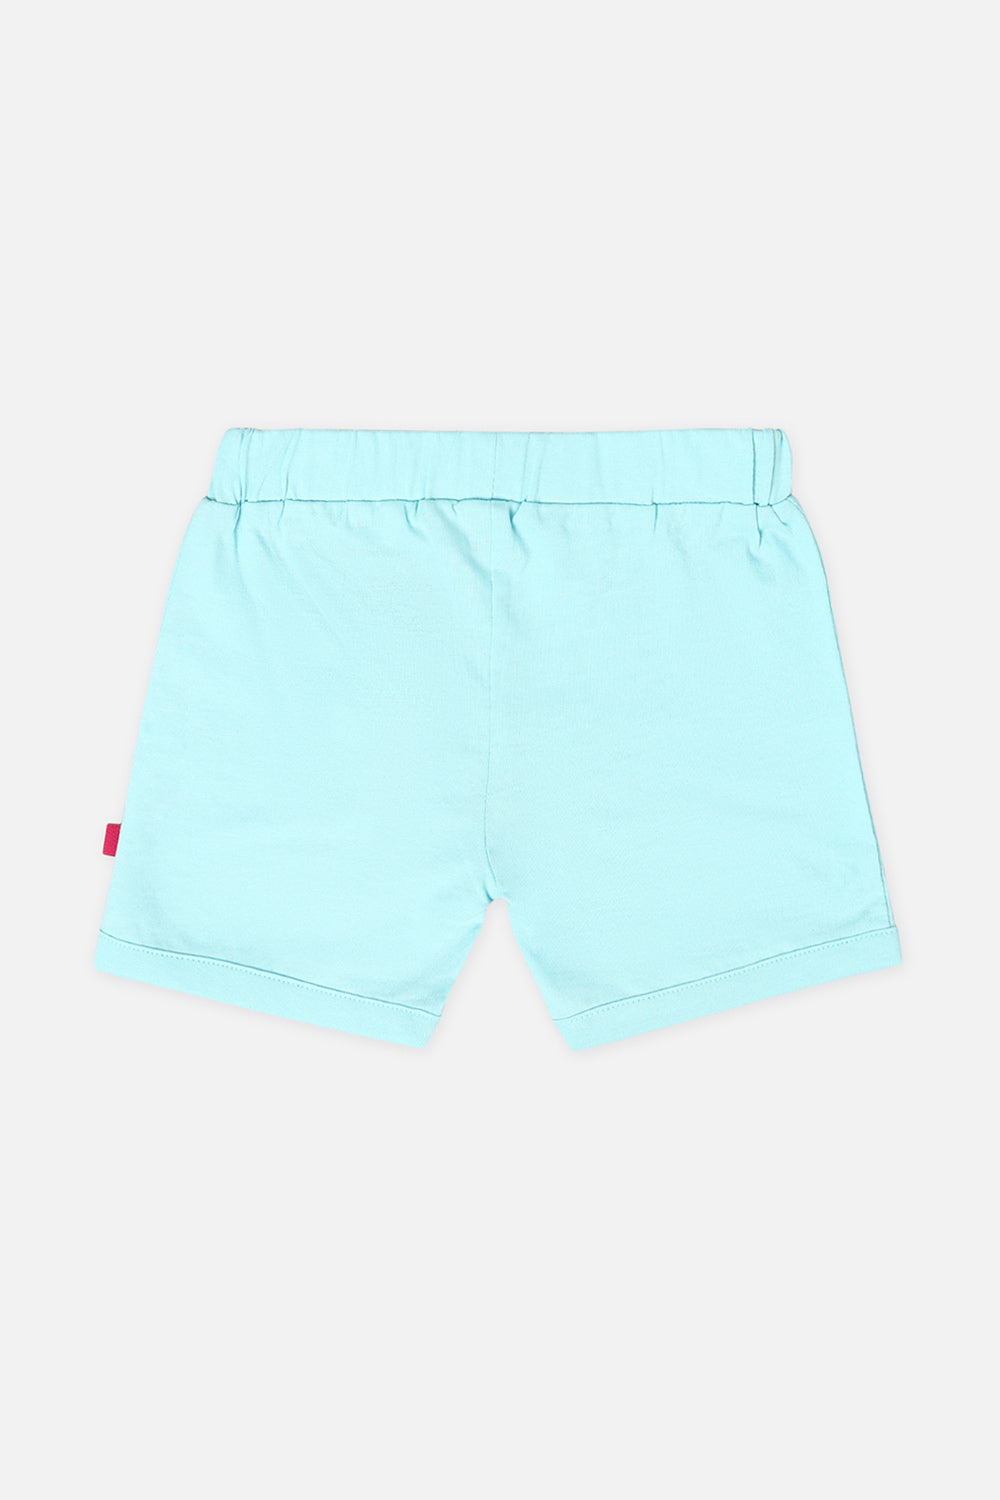 Oh Baby Comfy Shorts Knitted Light Blue-Sr02